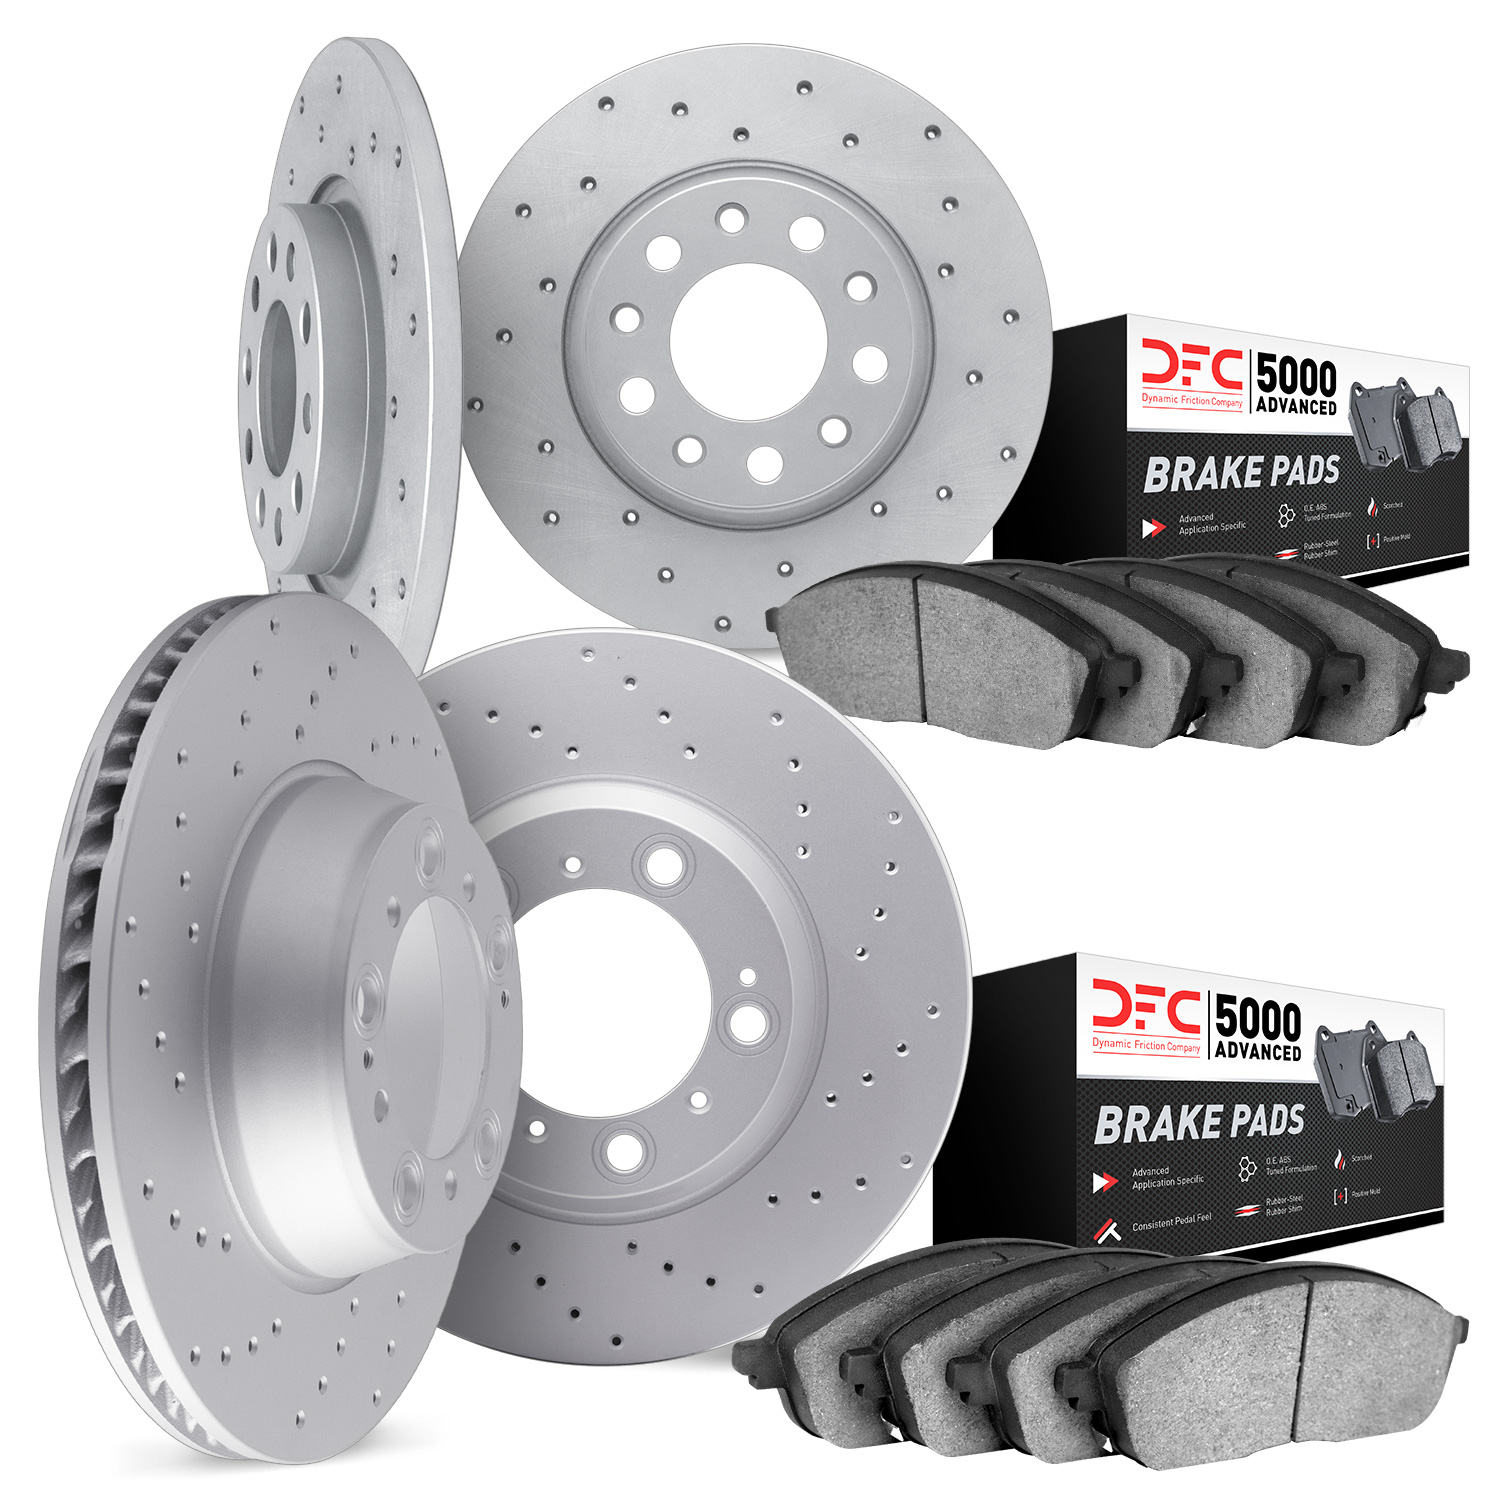 2704-80011 Geoperformance Drilled Brake Rotors with Active Performance Pads Kit, 2004-2013 Ford/Lincoln/Mercury/Mazda, Position: